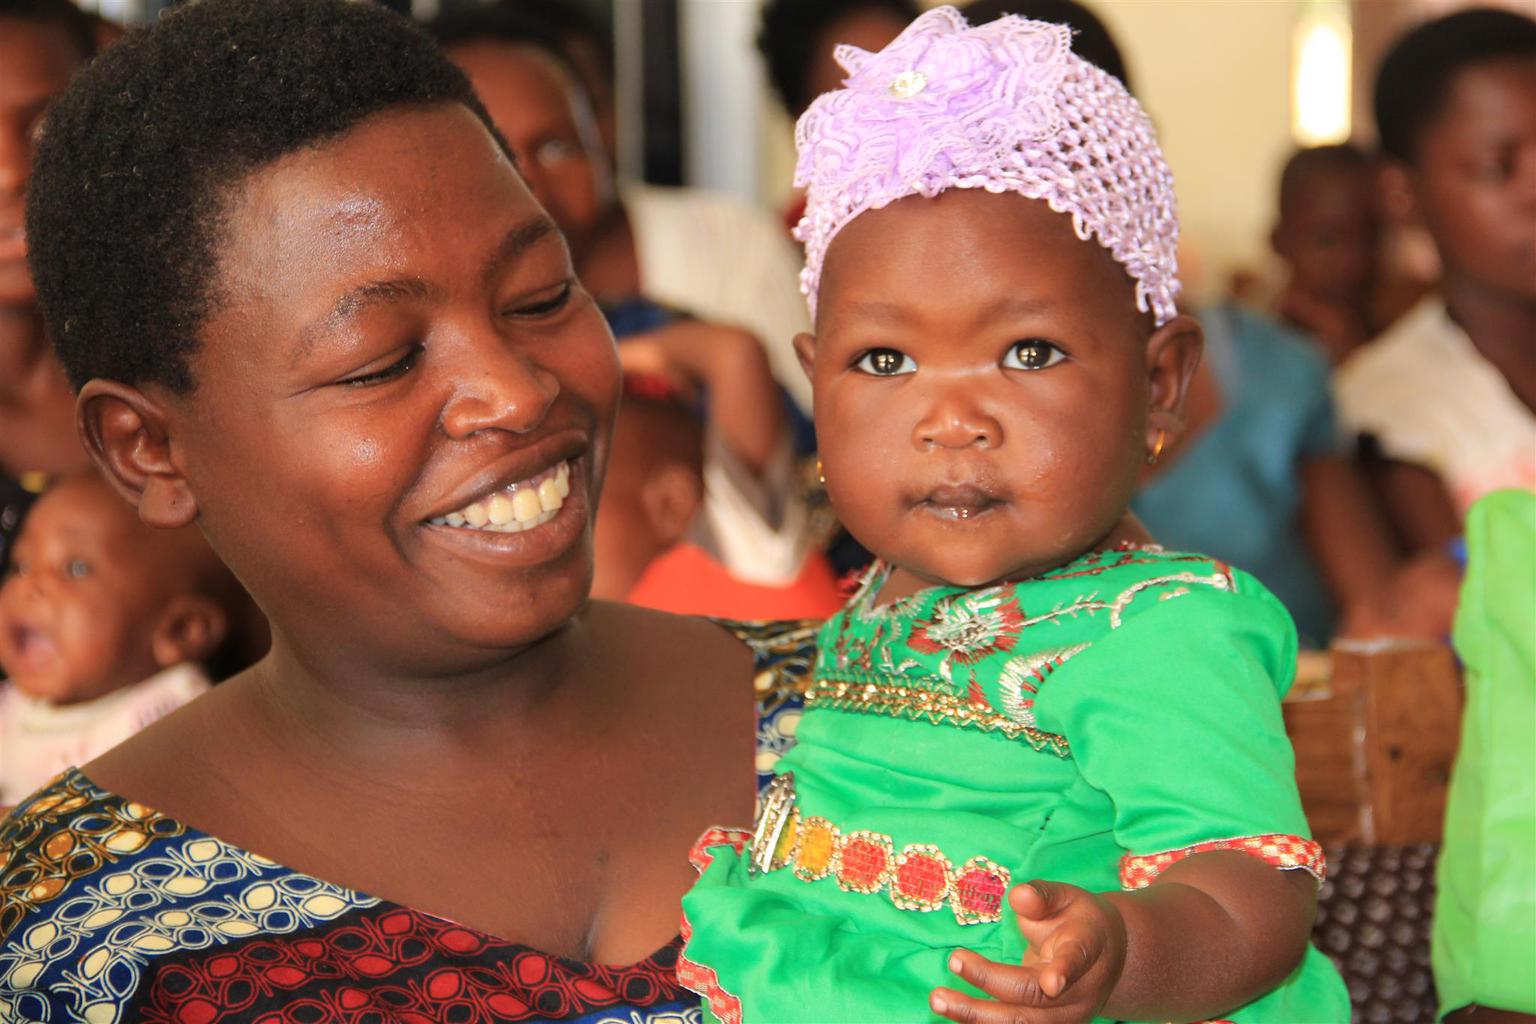 Photo of a smiling mother holding her daughter in Tanzania